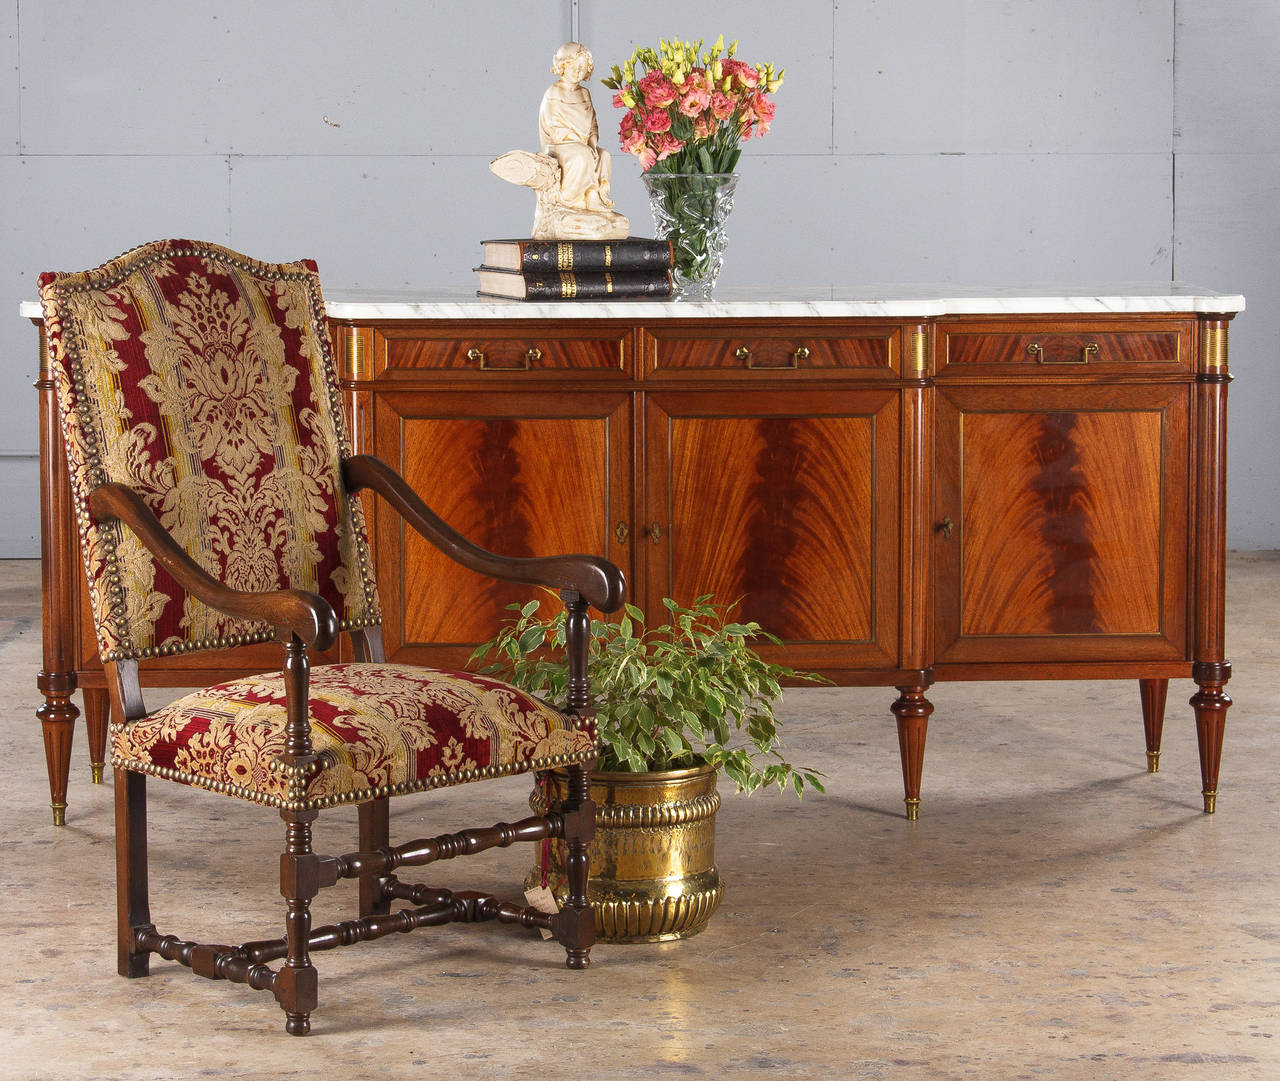 A magnificent four-door Louis XVI Style enfilade buffet made of flamed mahogany with a Carrara marble top. Featuring brass accents including trim around door panels and drawers, classic brass handles and striated plaques in the apron. The spindled